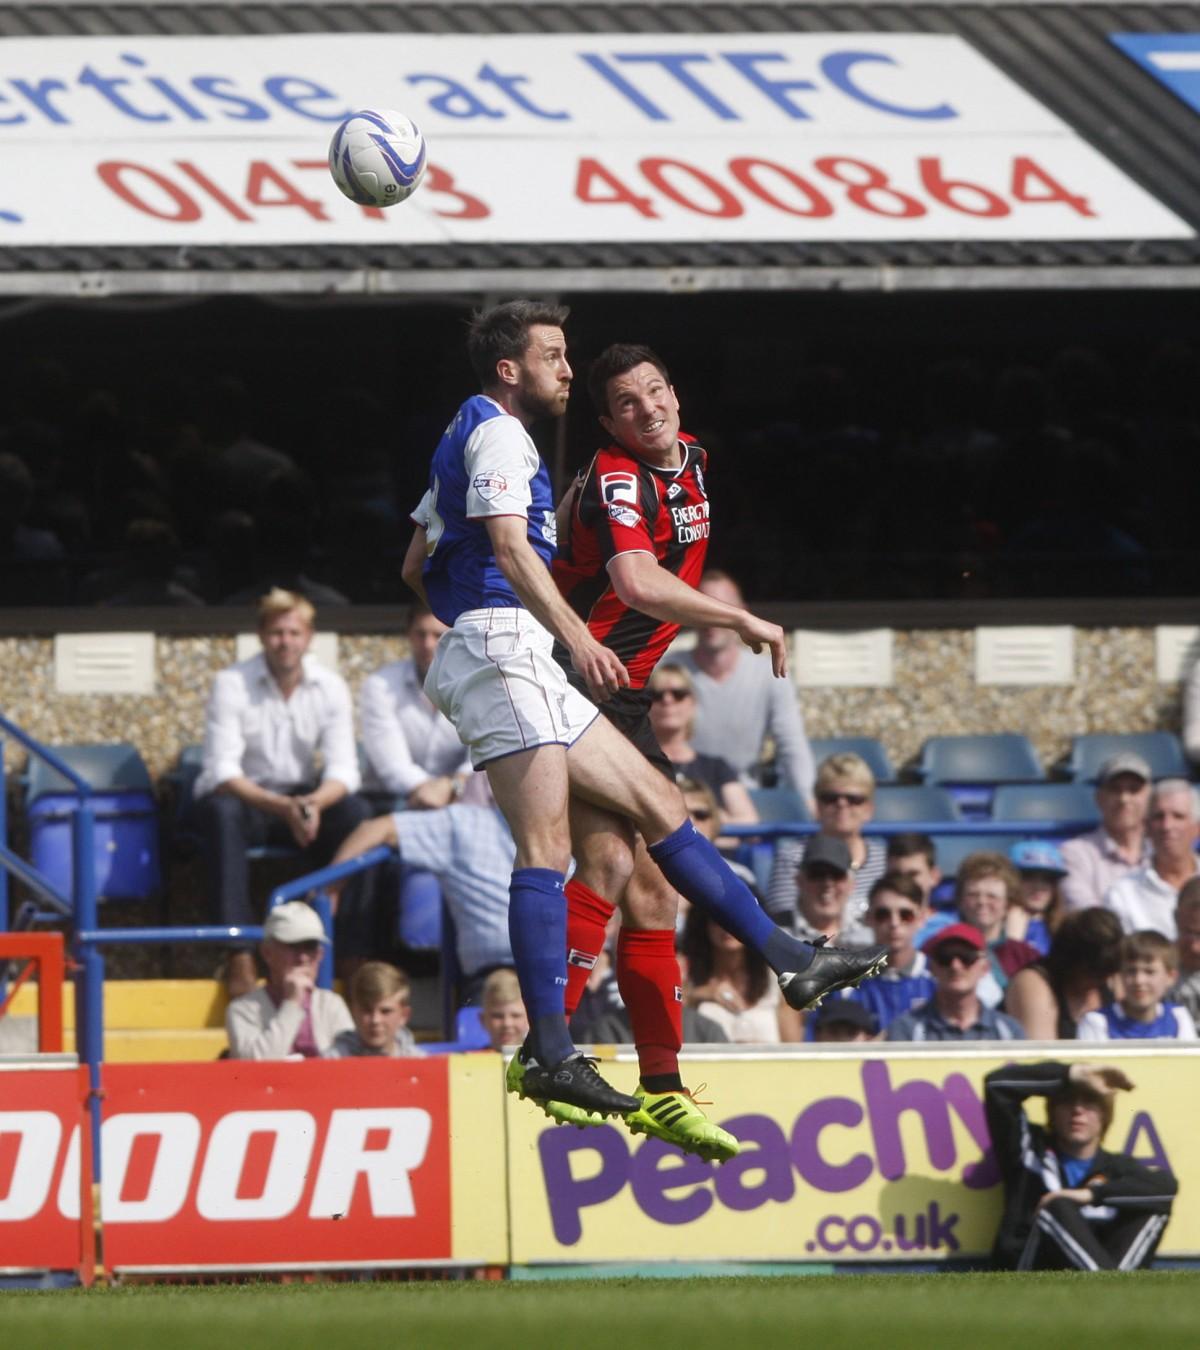 See all our pictures from Ipswich Town v AFC Bournemouth on Monday, April 21, 2014